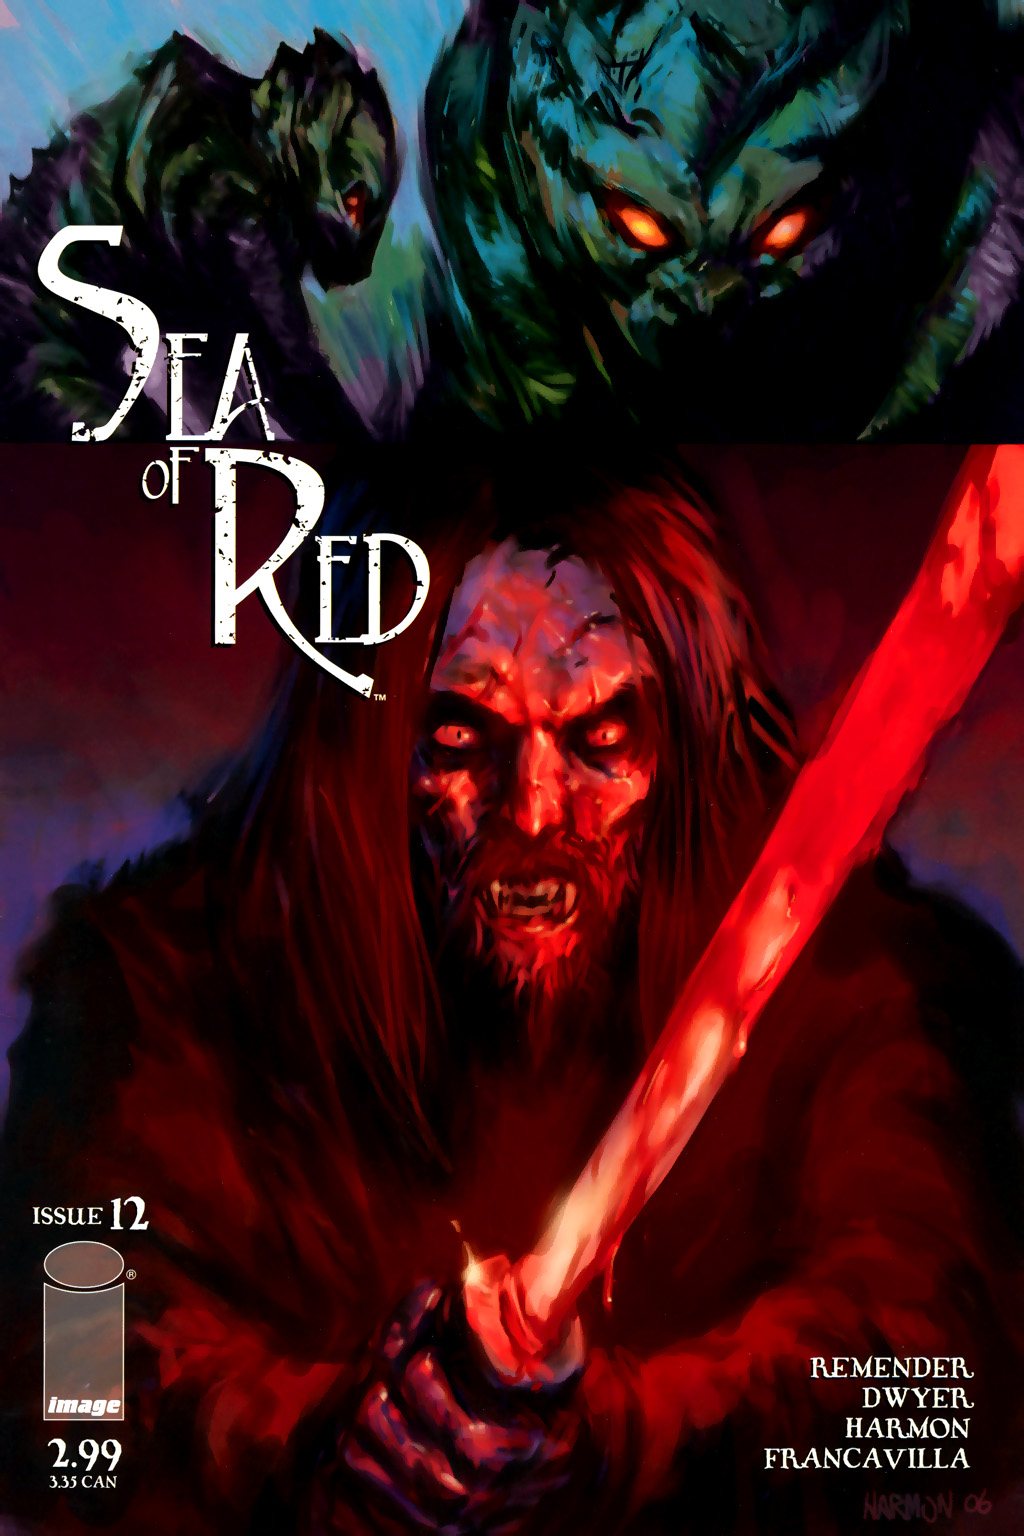 Sea of Red #12 